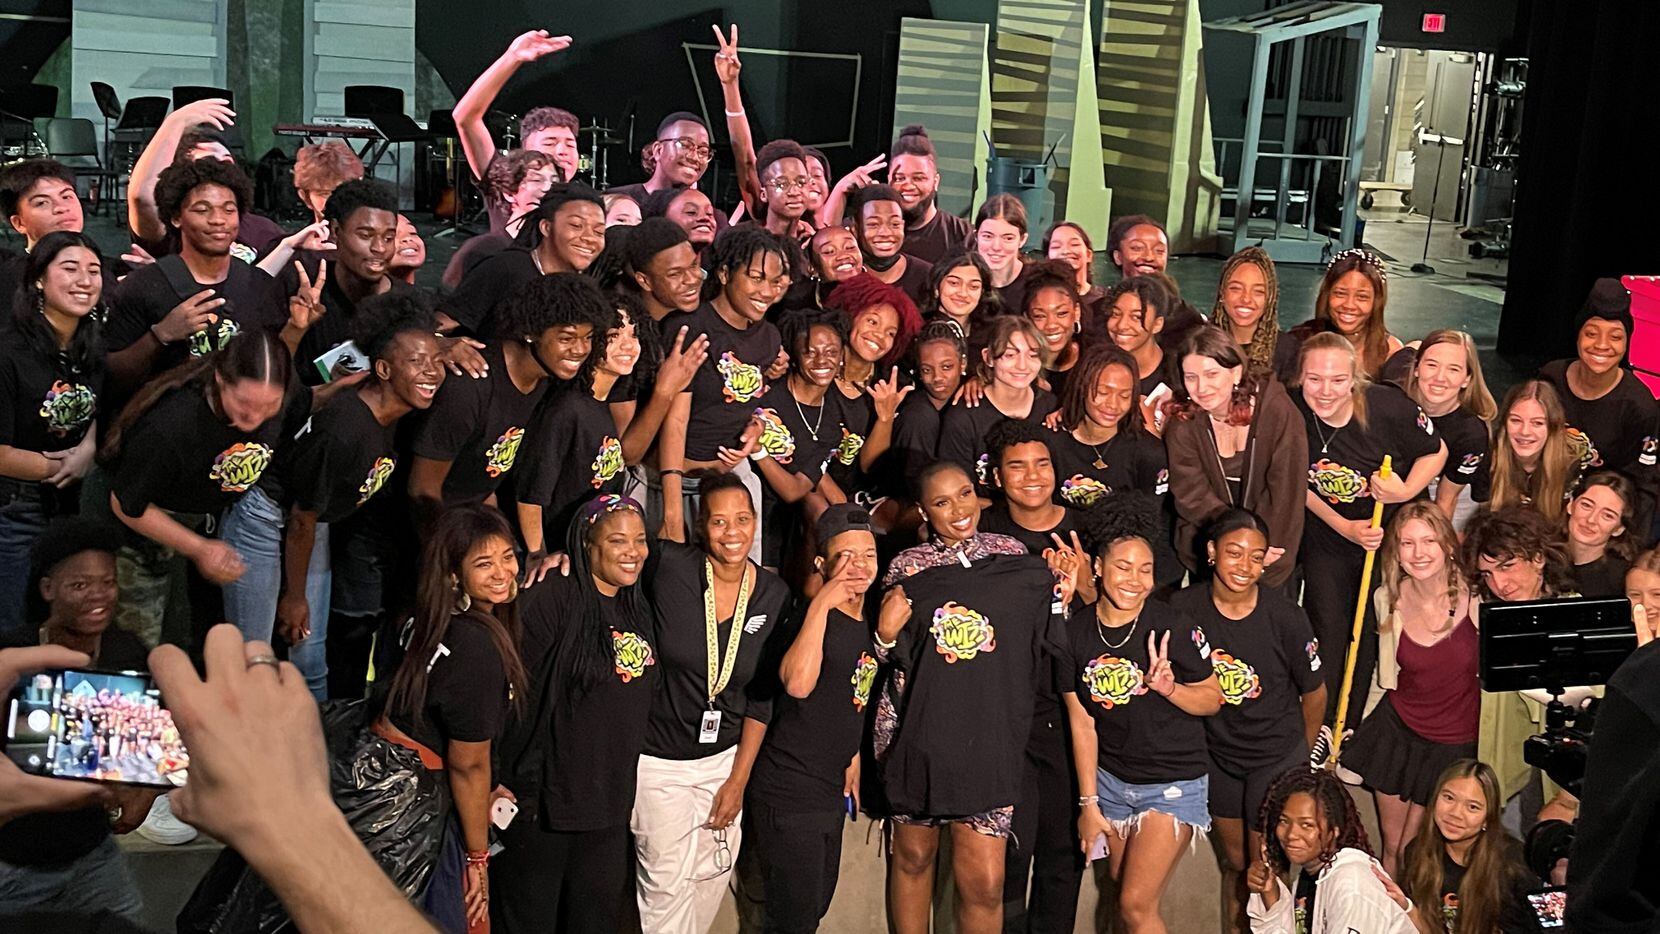 Jennifer Hudson poses with students at the Booker T. Washington School of Performing Arts on...